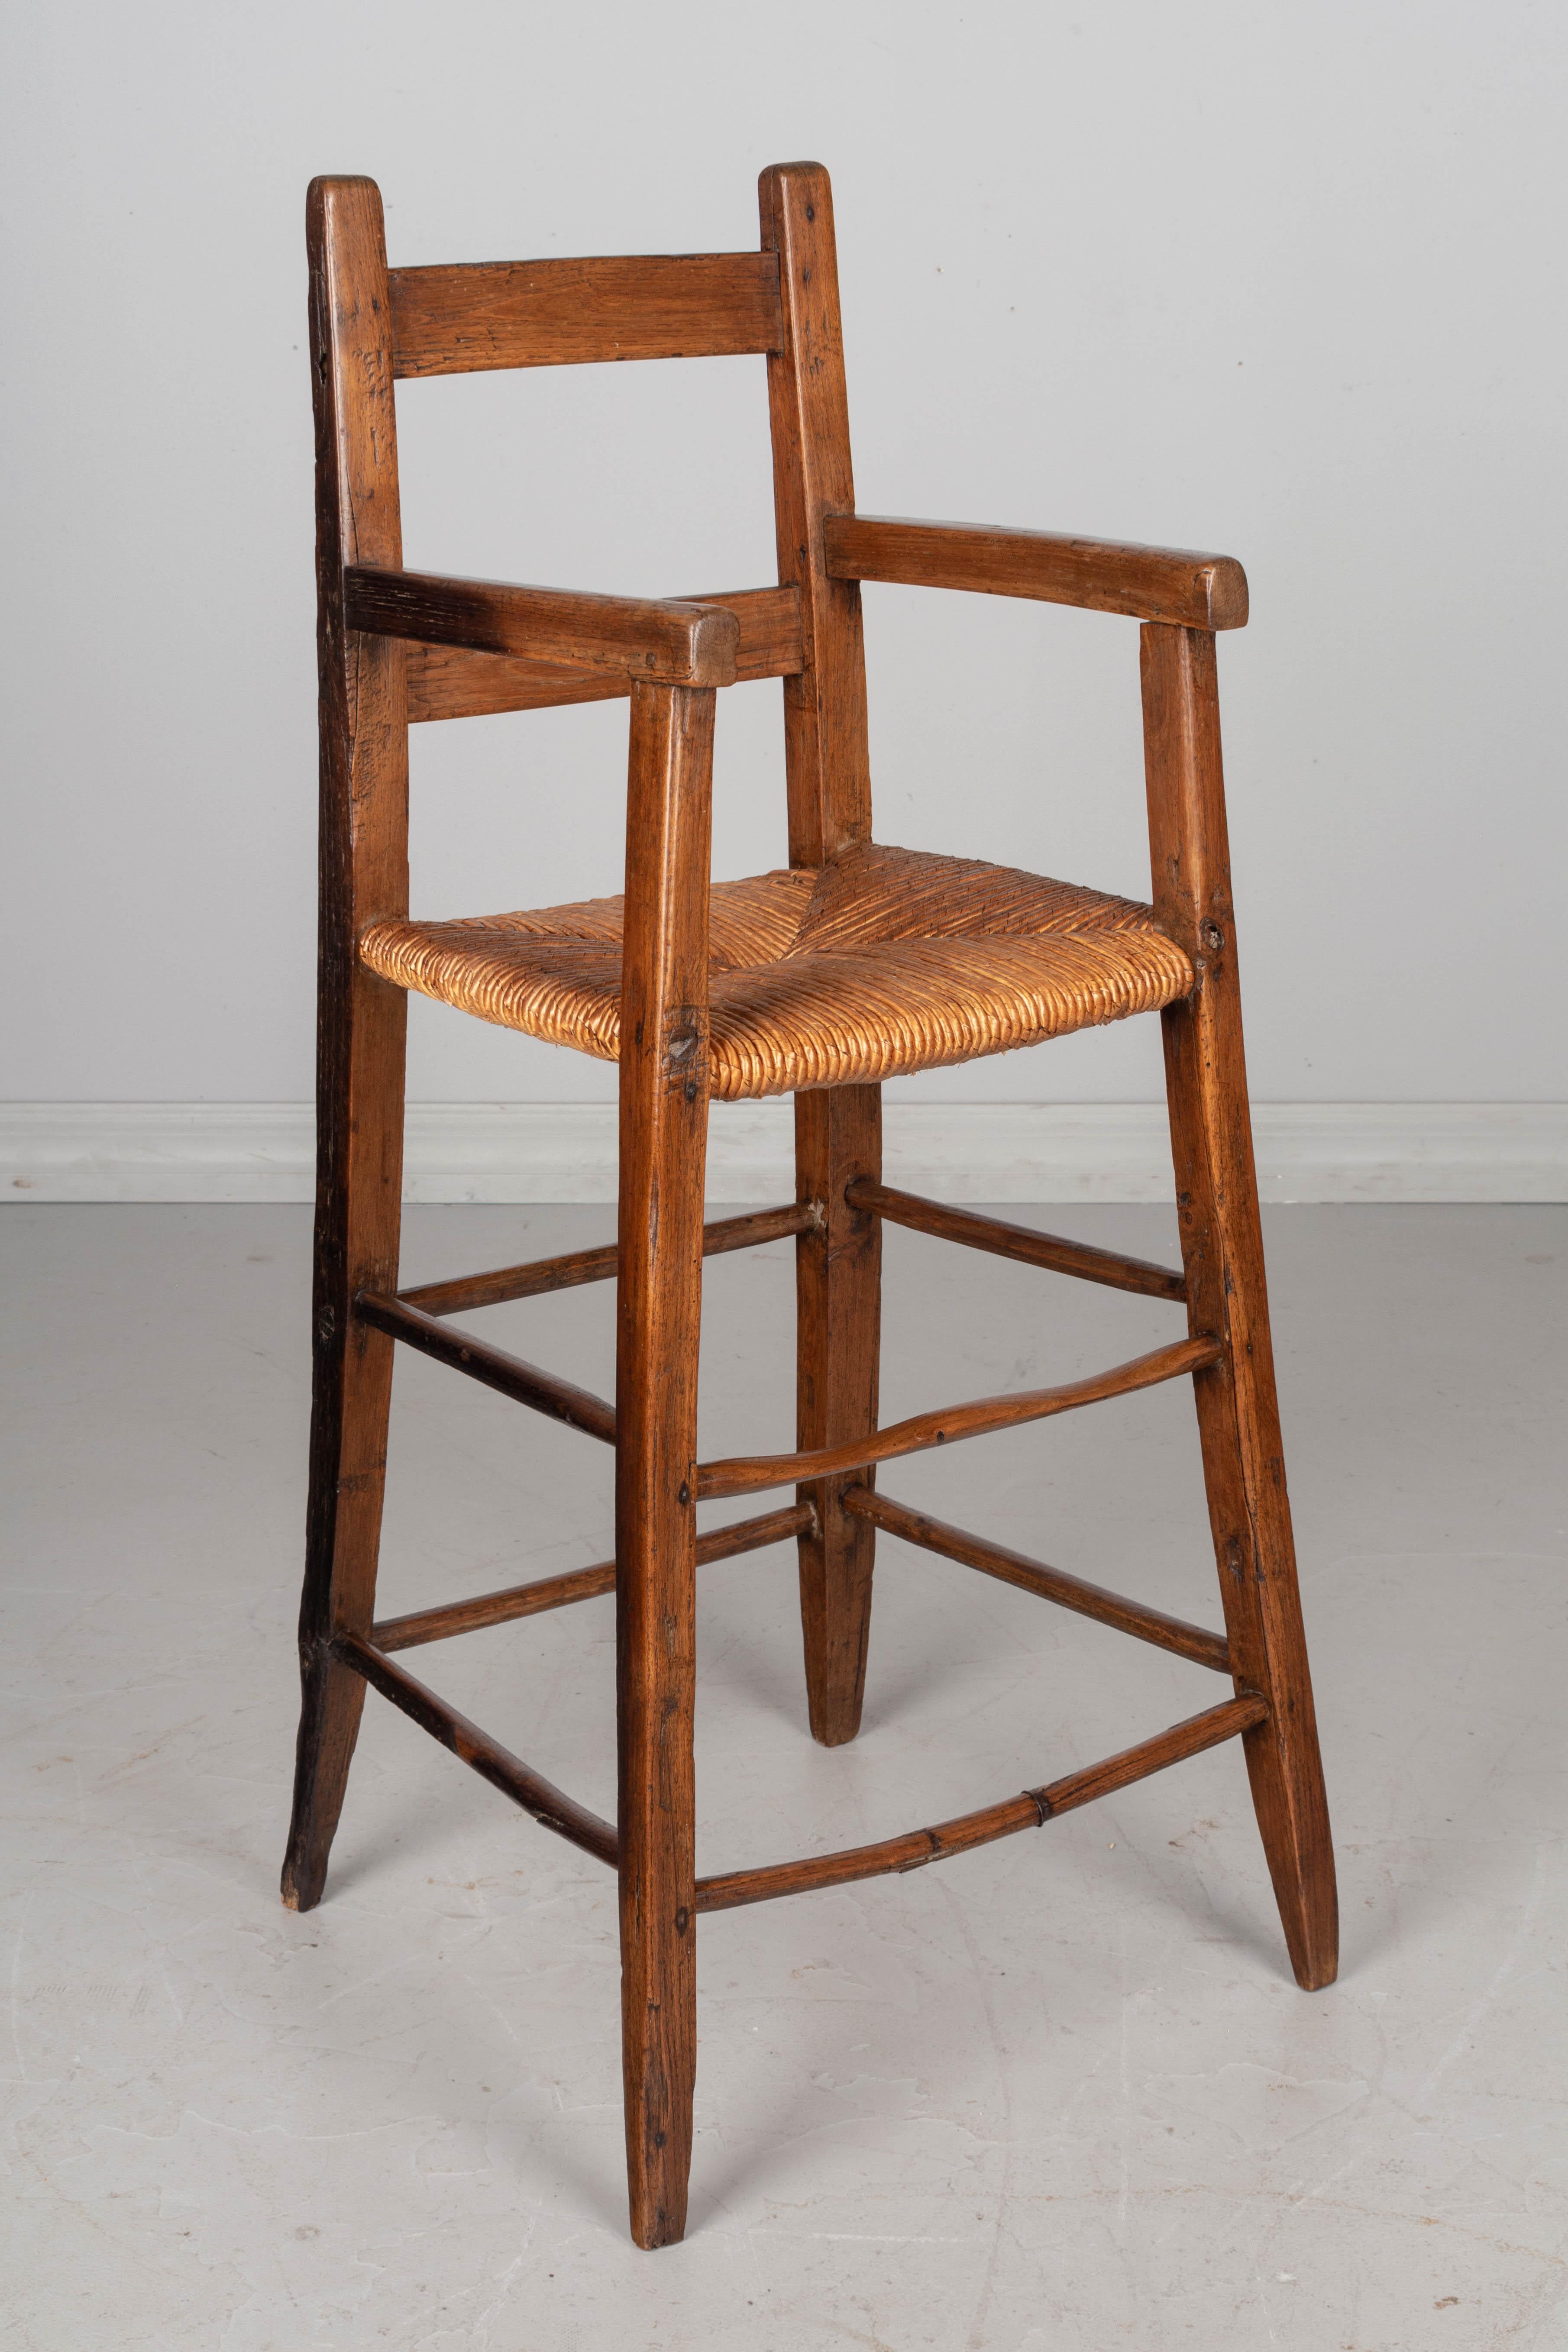 A late 19th century Country French child's high chair, or doll chair, made of oak with waxed patina and natural rush seat. The spindles are all original, some have been repaired. Wood is darkened on one side, may have been used next to a fireplace.